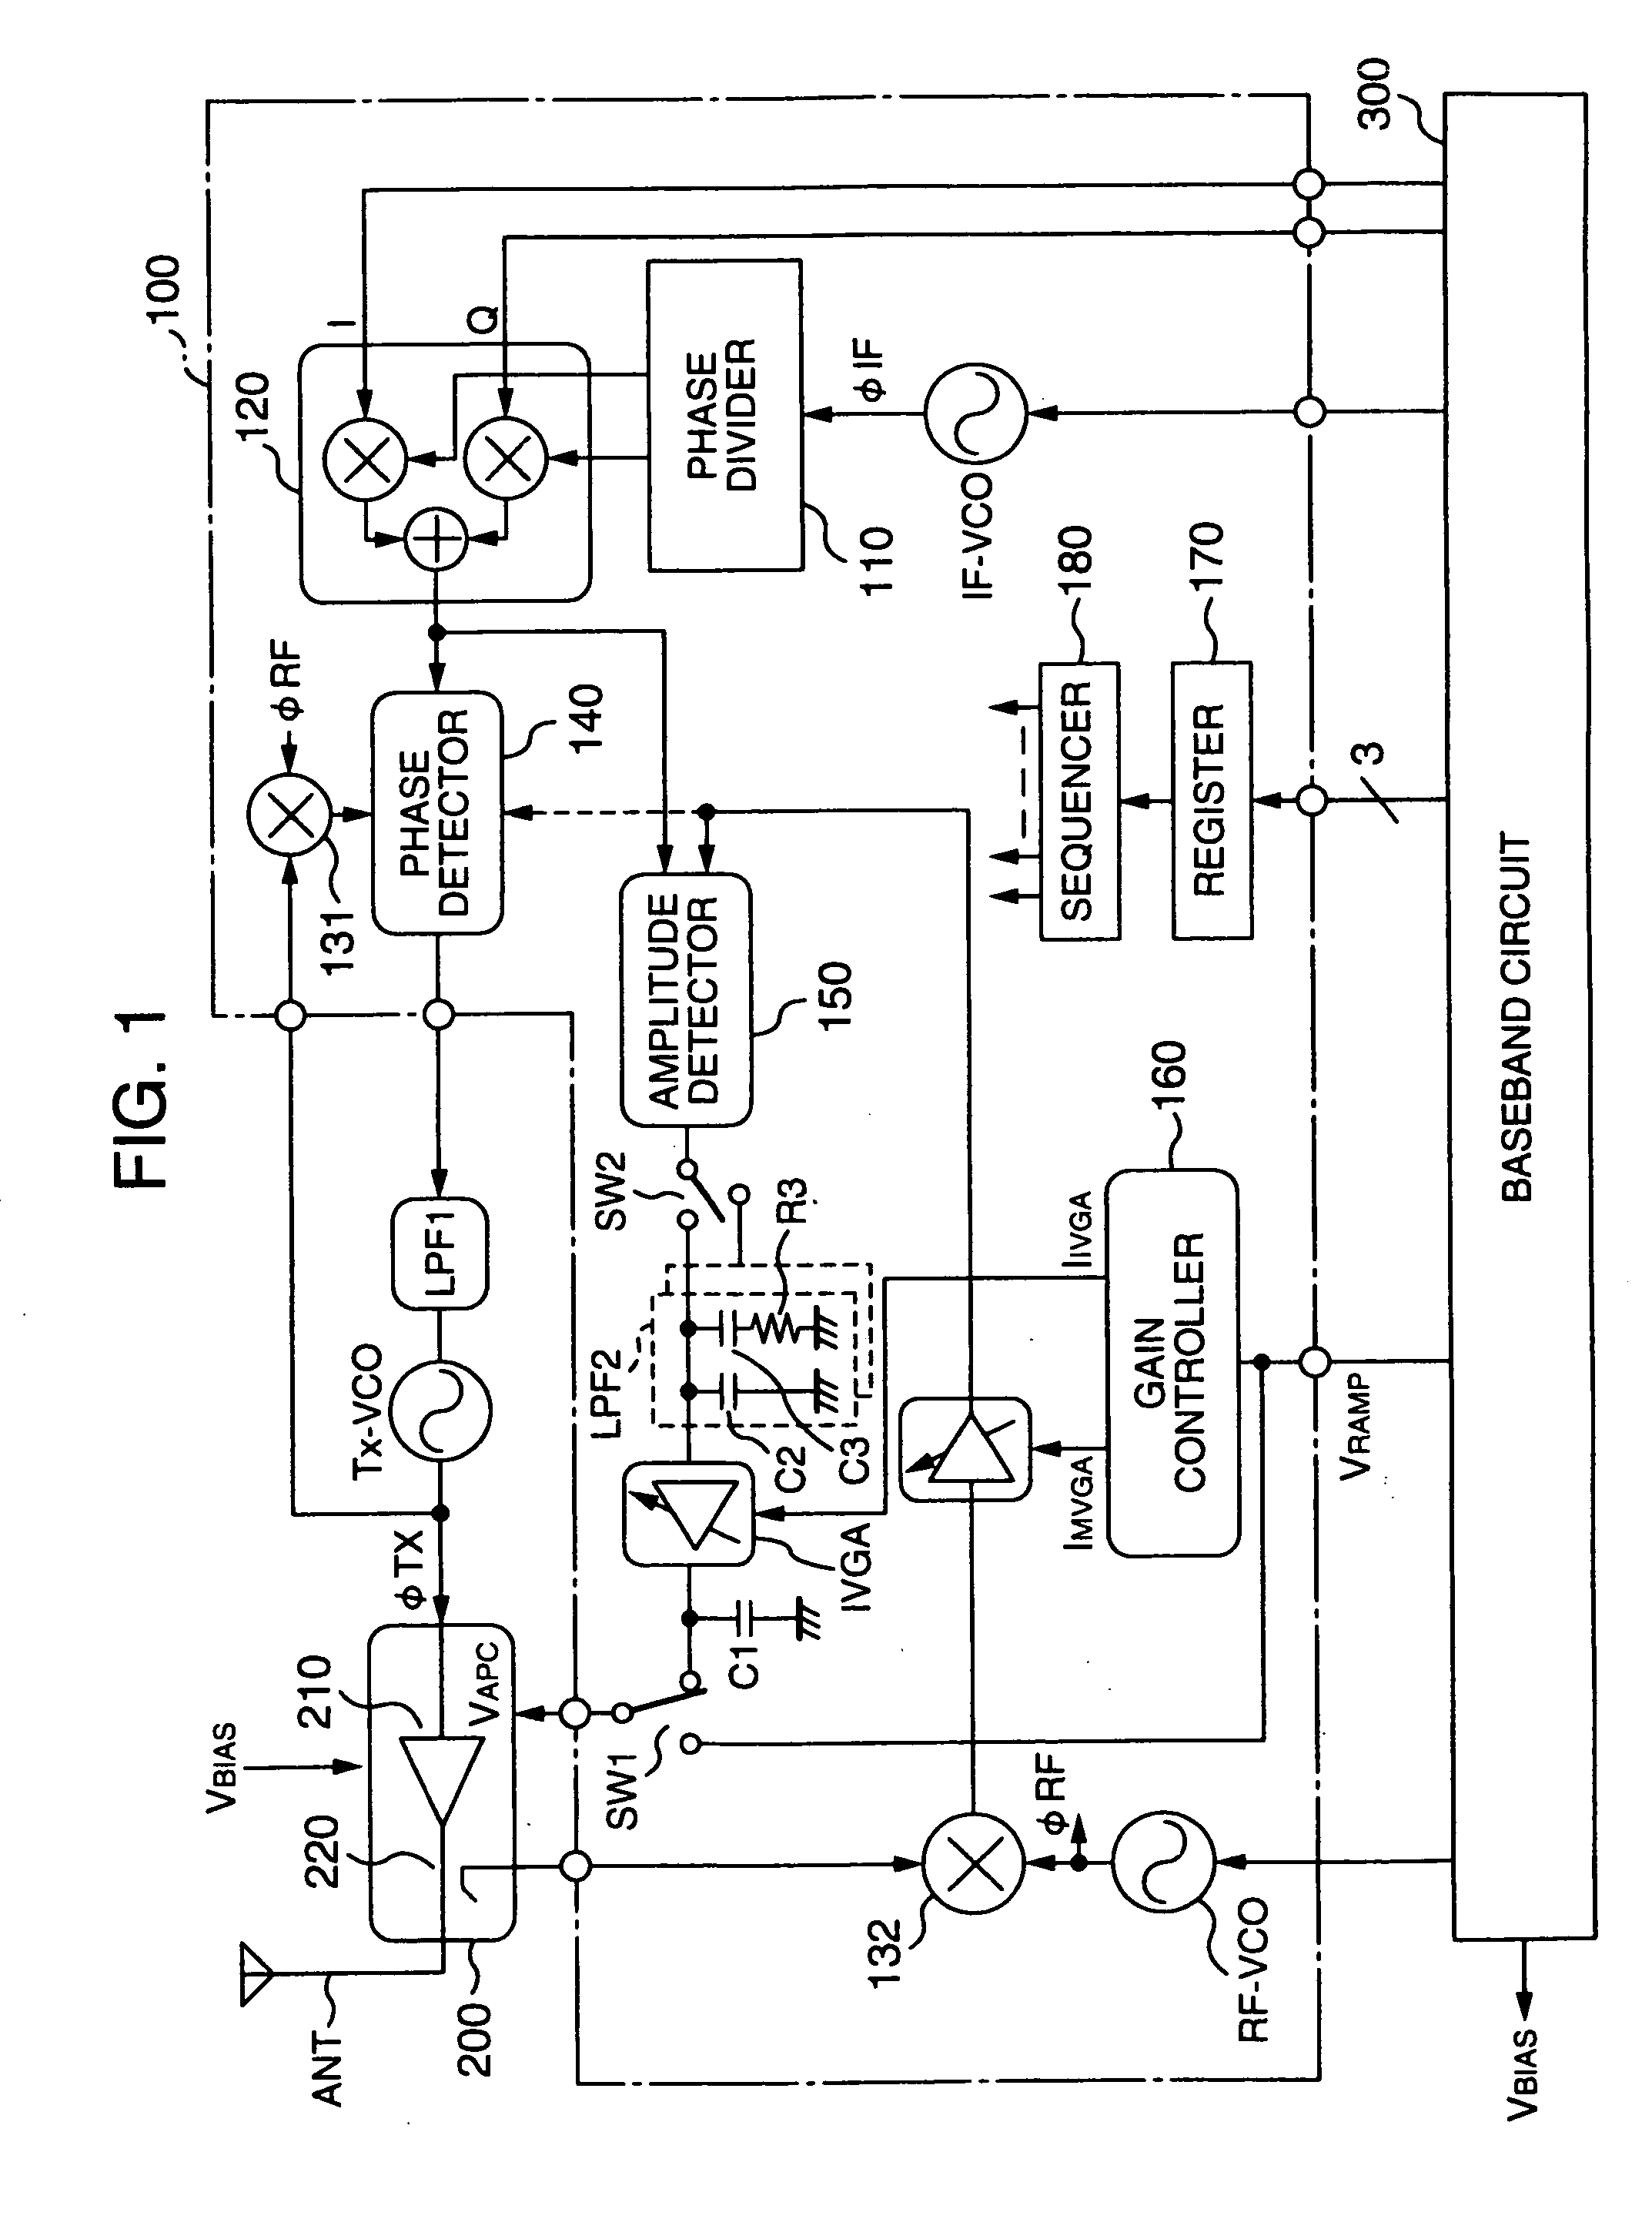 Communication semiconductor integrated circuit, a wireless communication apparatus, and a loop gain calibration method